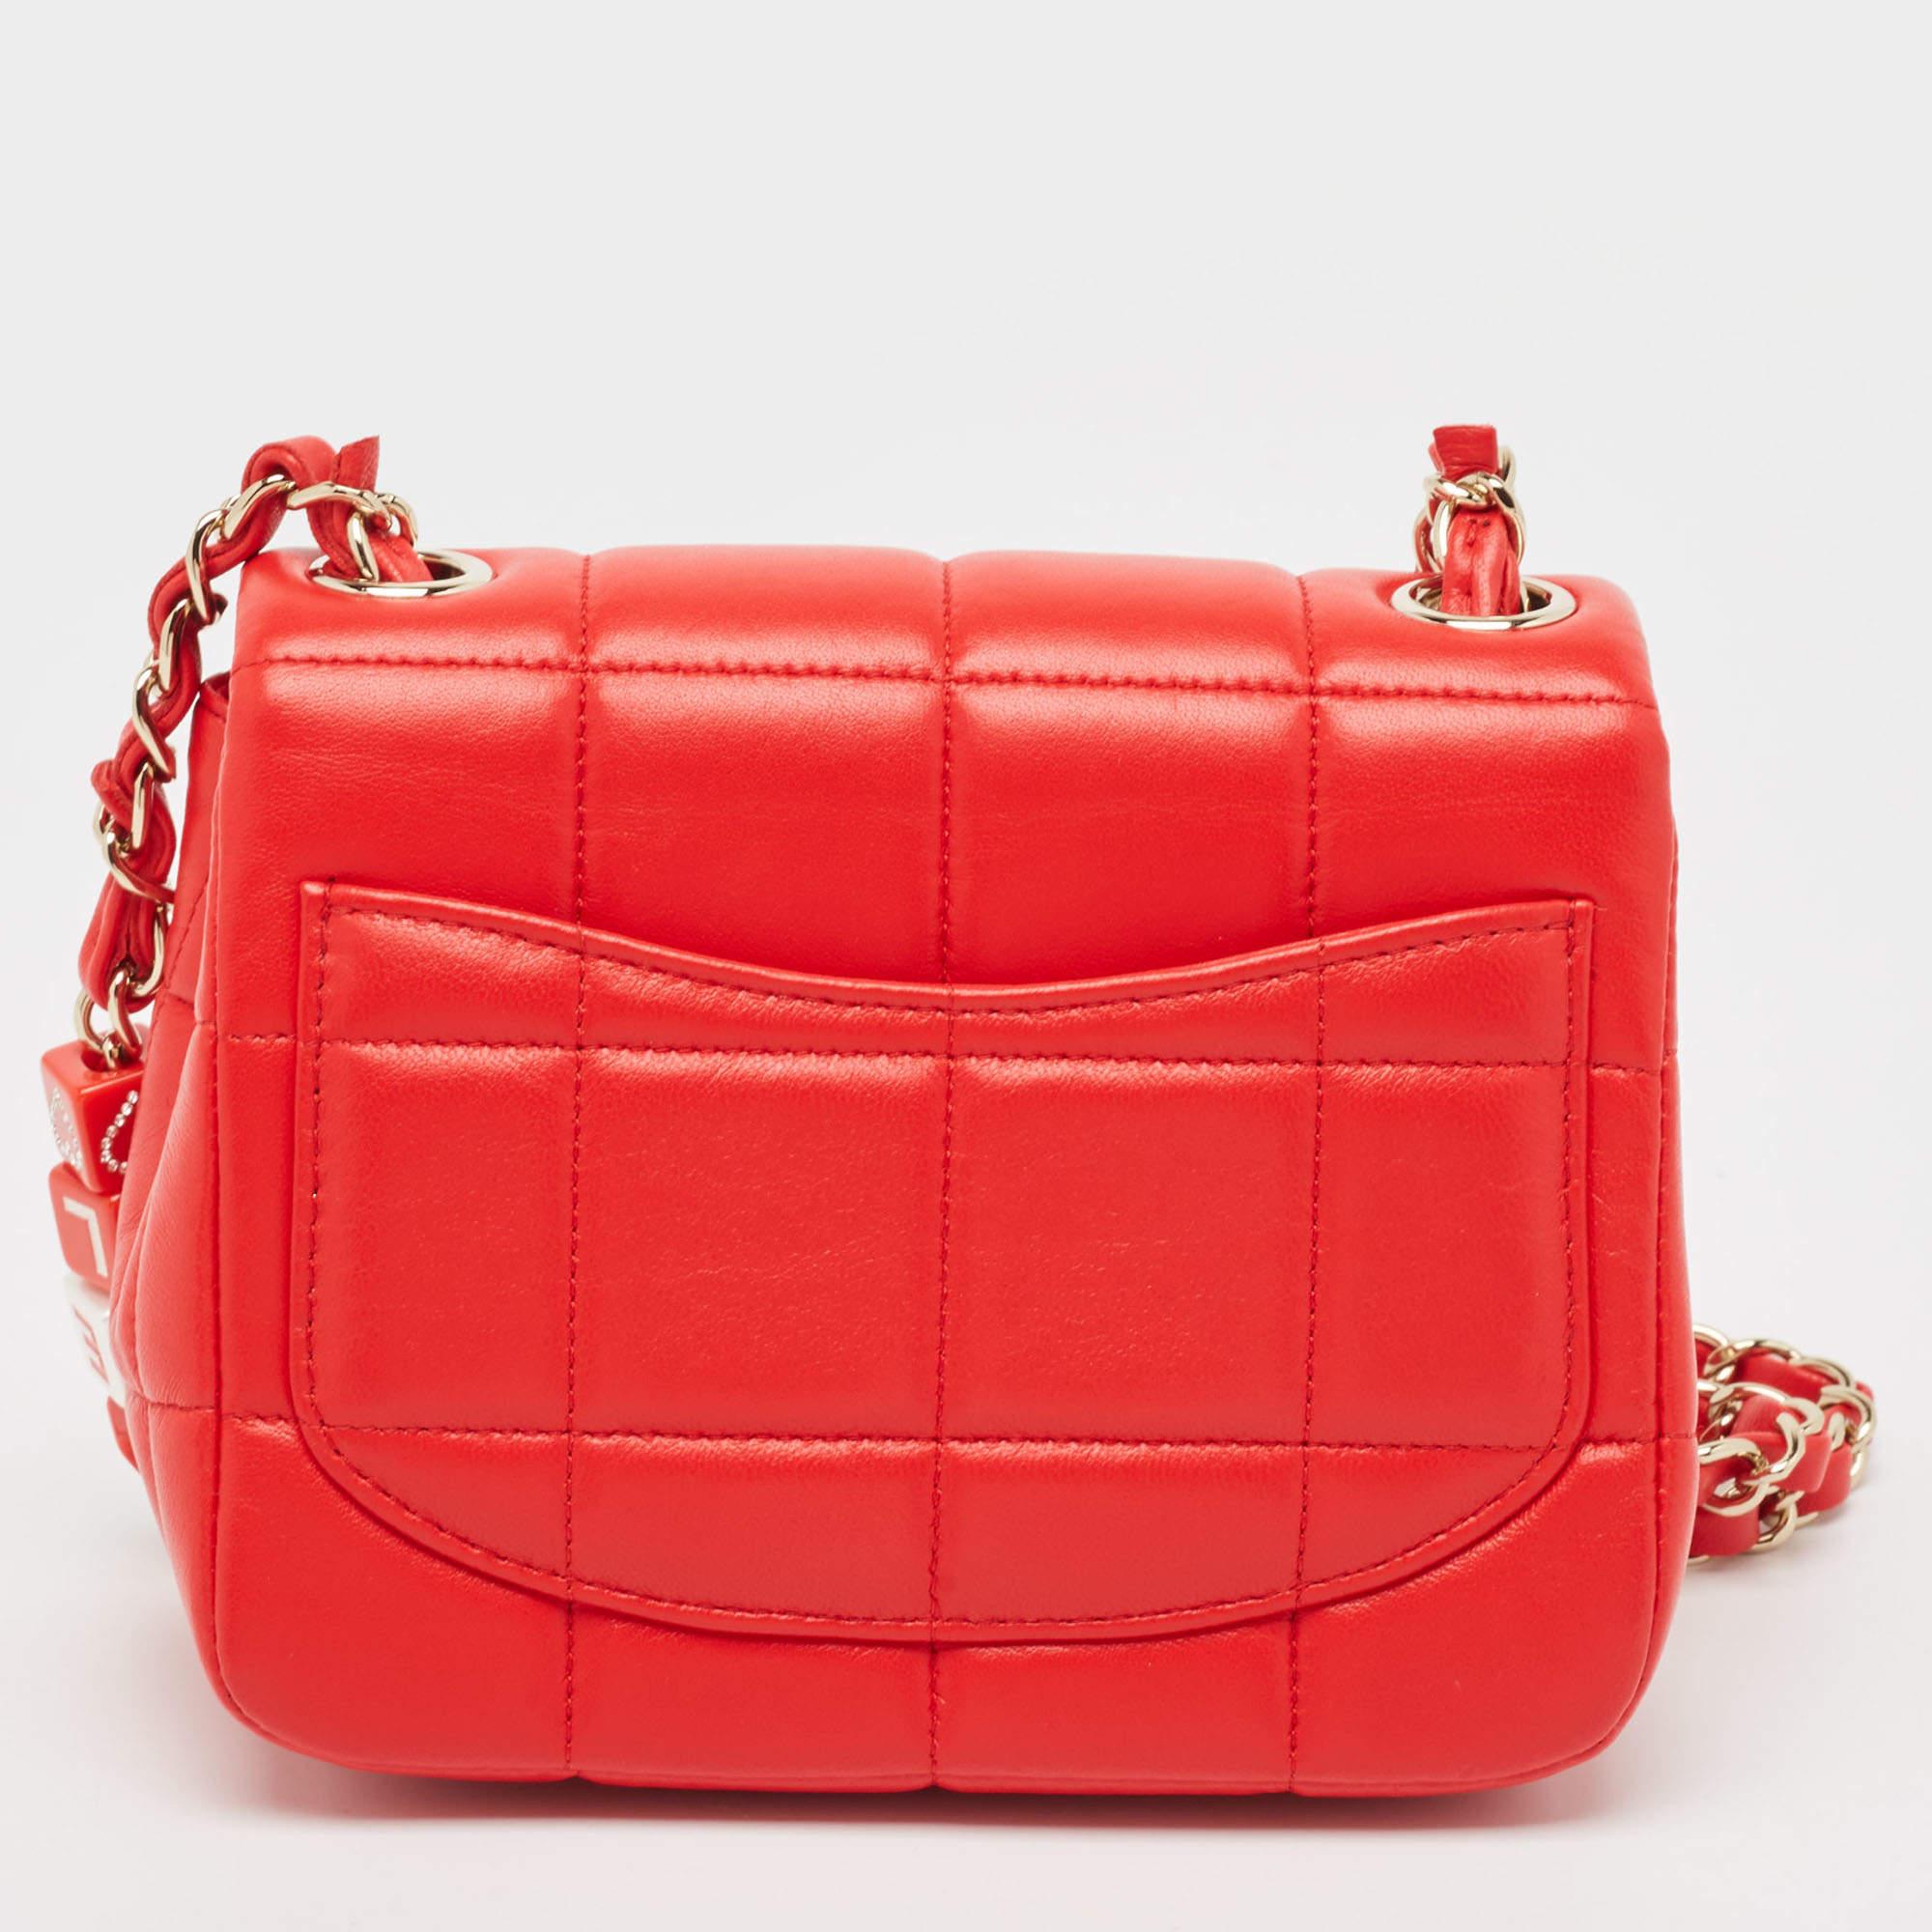 Crafted from luxurious red quilted leather, the Chanel Monacoco flap bag exudes timeless elegance. Its compact design features the iconic CC turn-lock closure and a delicate chain strap with brand details, offering both style and functionality.